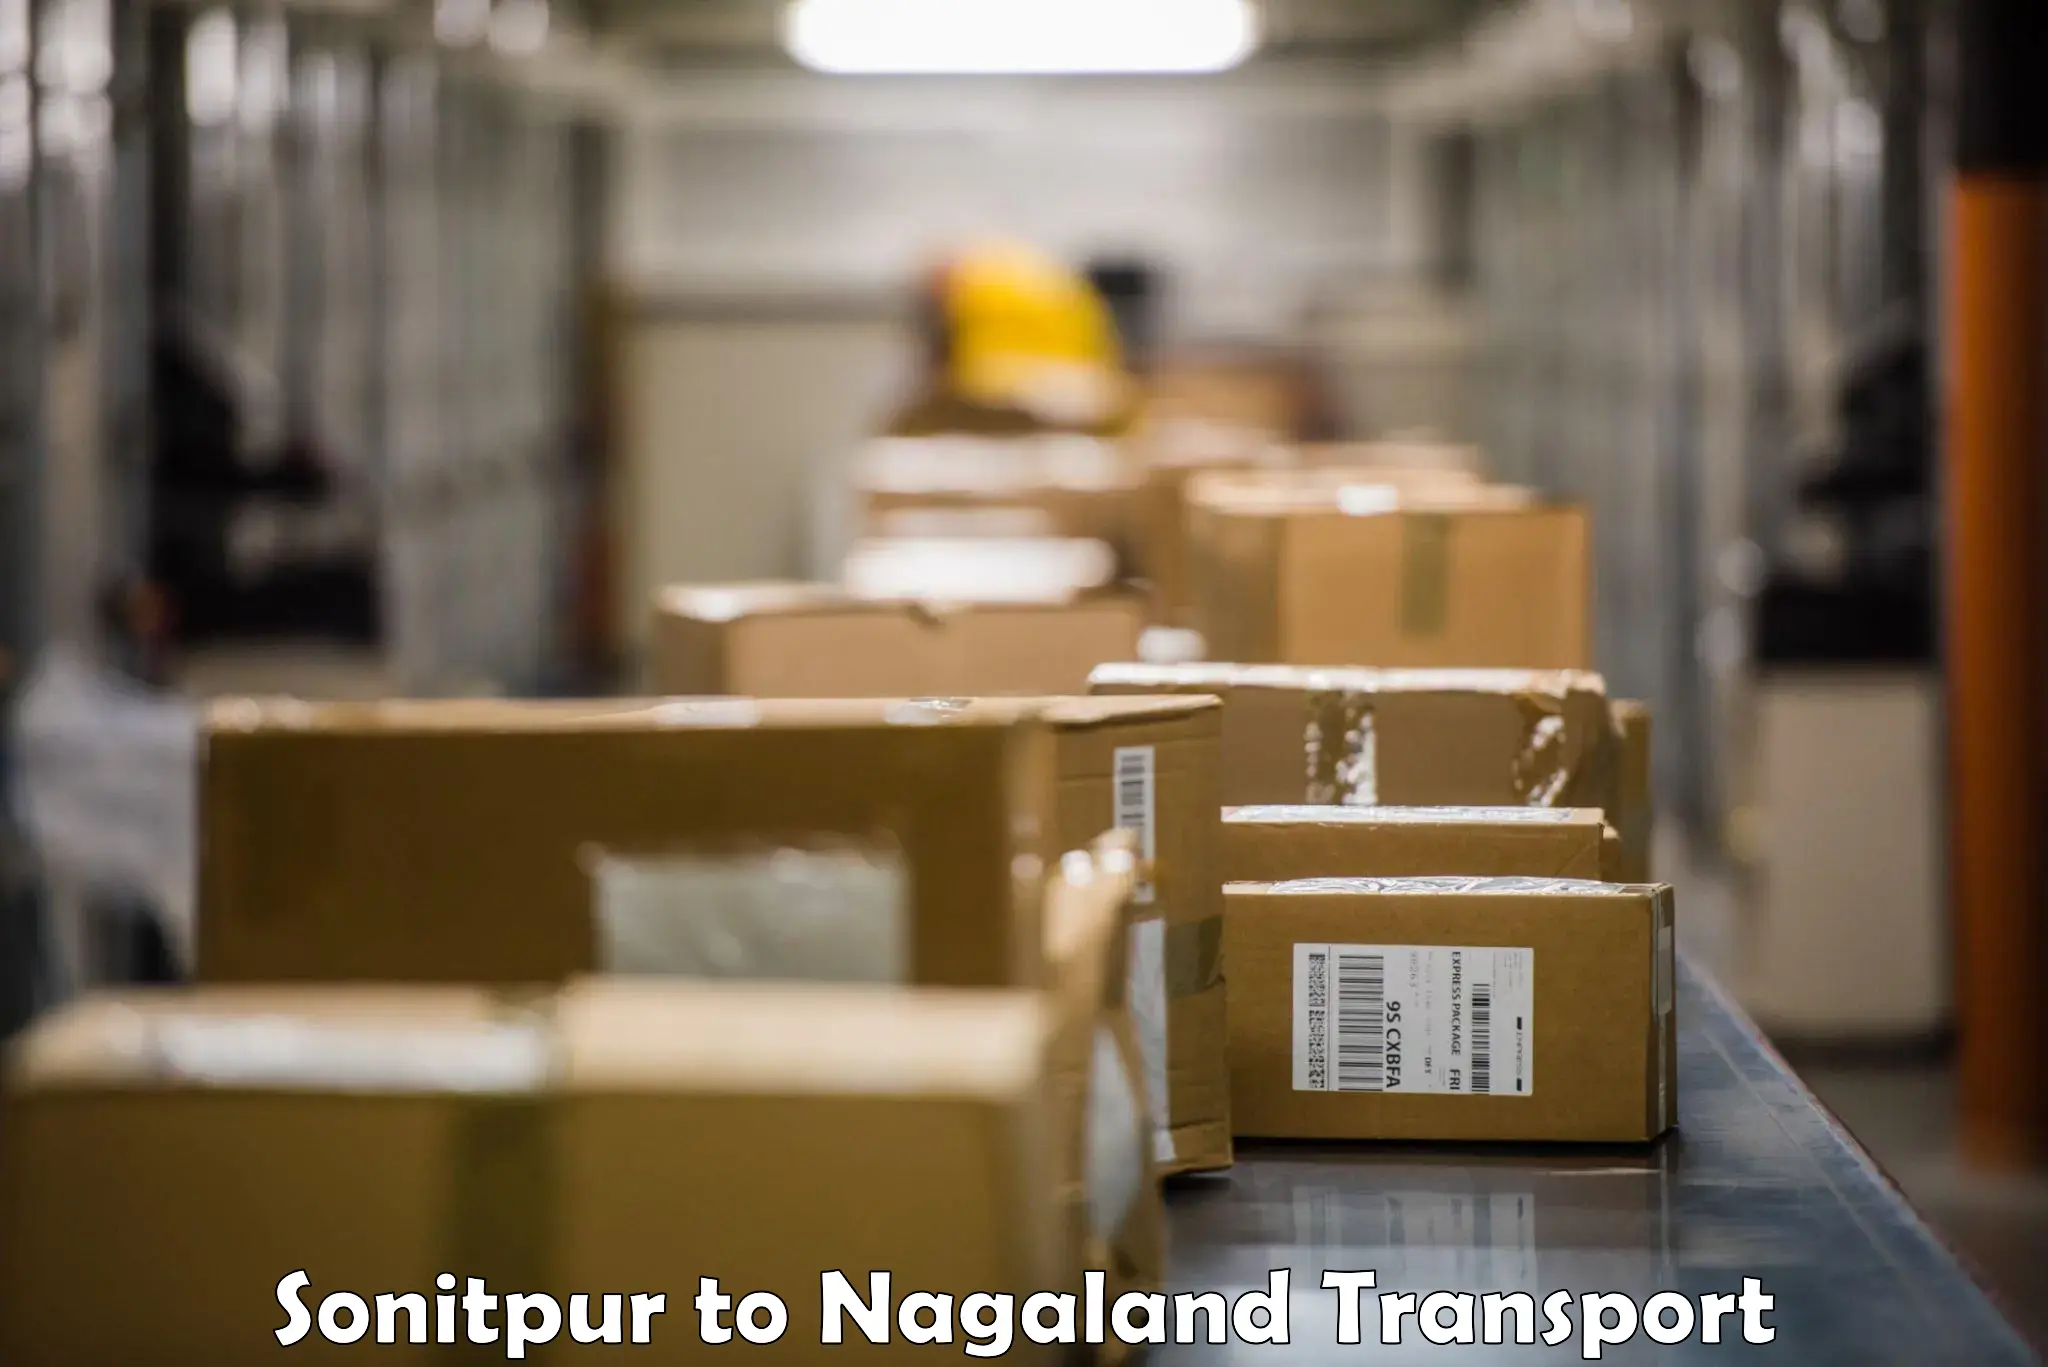 Nationwide transport services Sonitpur to Nagaland